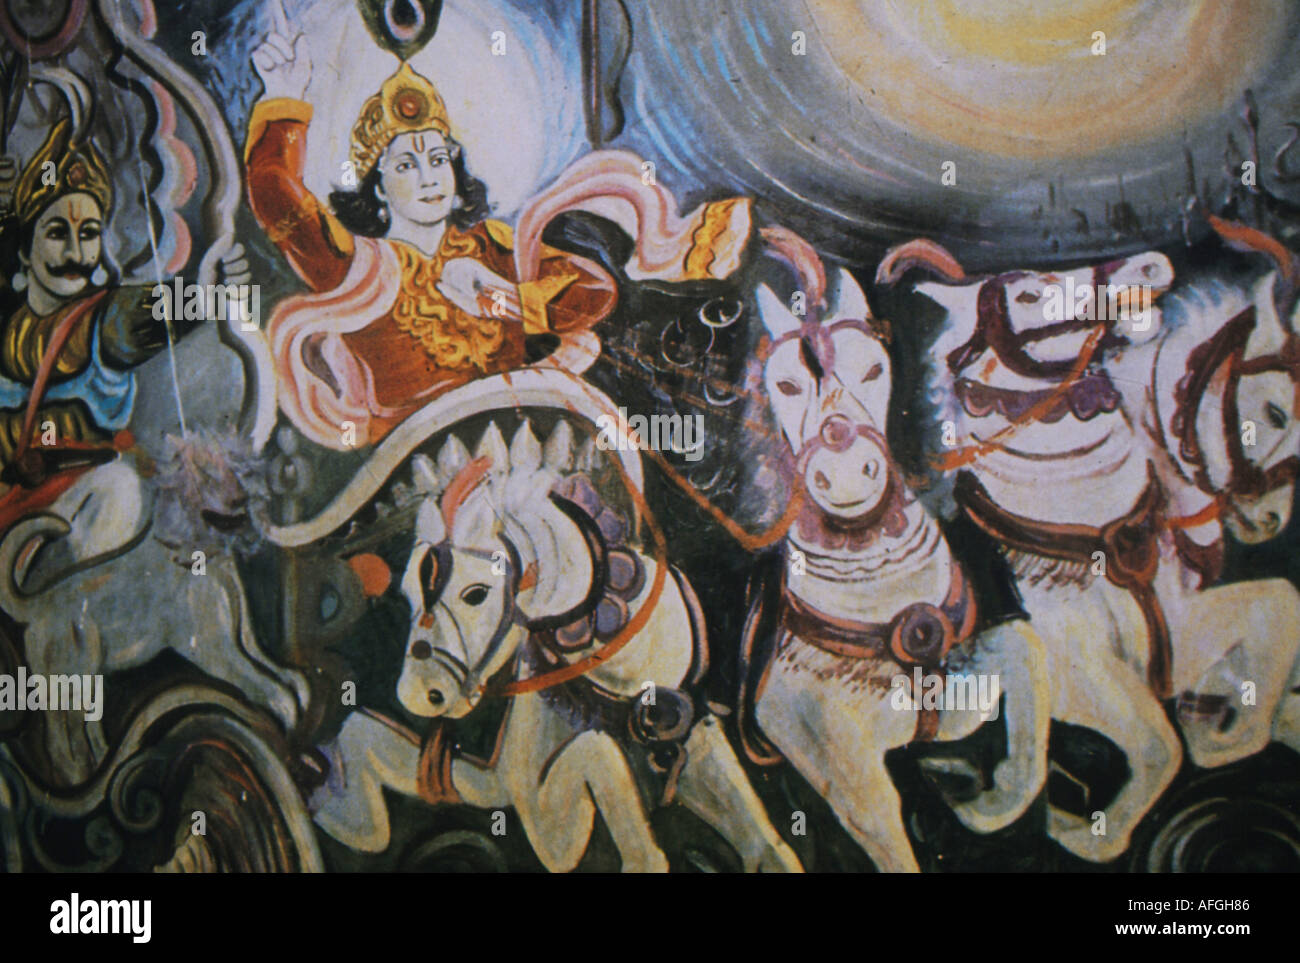 Krishna driving a four horse chariot, four symbolising the four vedas. The chariot was given to Arjuna by Agni, God of Fire. Stock Photo